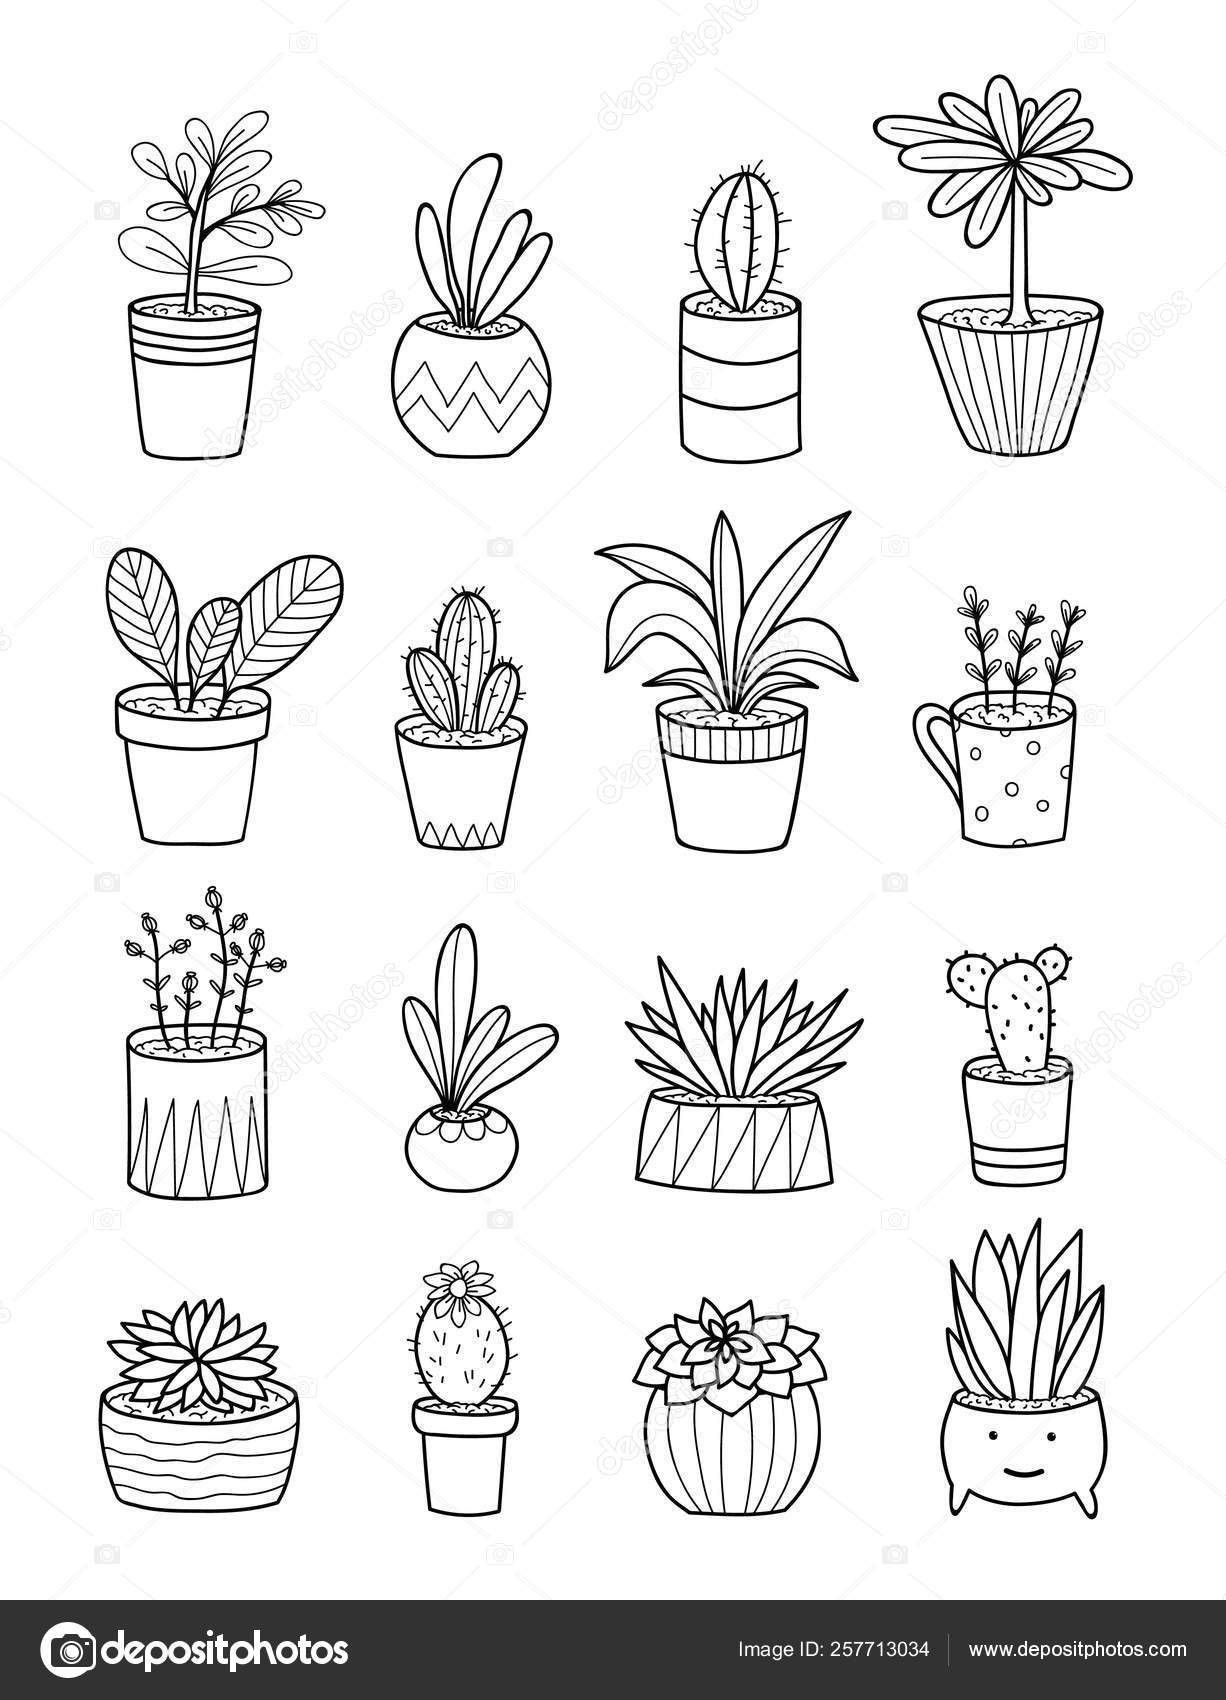 Kantine Christchurch frokost Hand Drawing Home Plants Pots Cartoon Doodles Isolated Elements Stock  Illustration by ©alenaganzhela #257713034